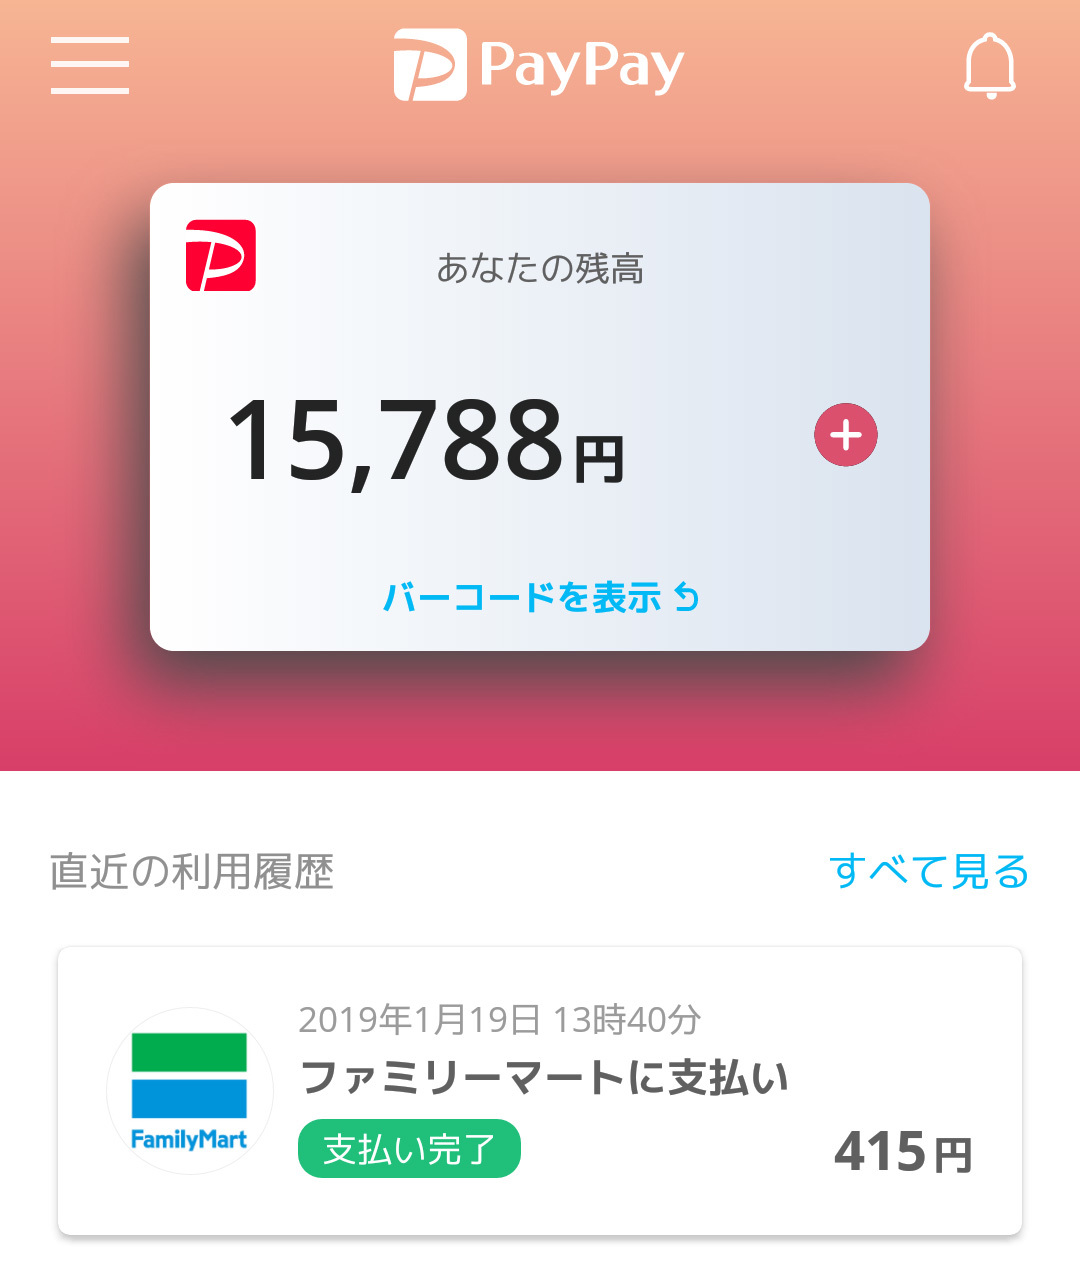 PayPay初使用